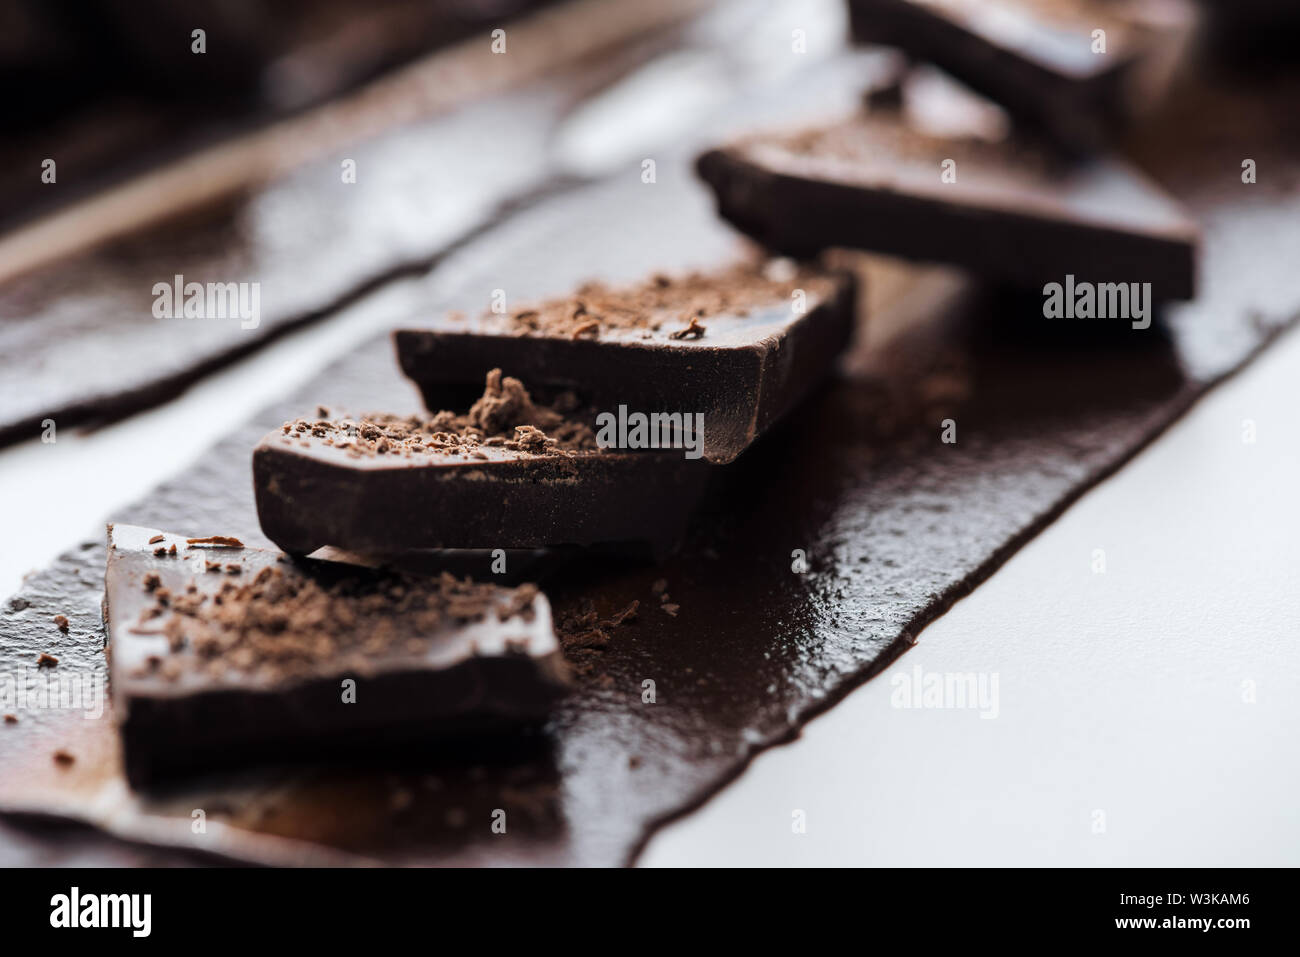 Selective focus of pieces of chocolate bar with cocoa powder Stock Photo